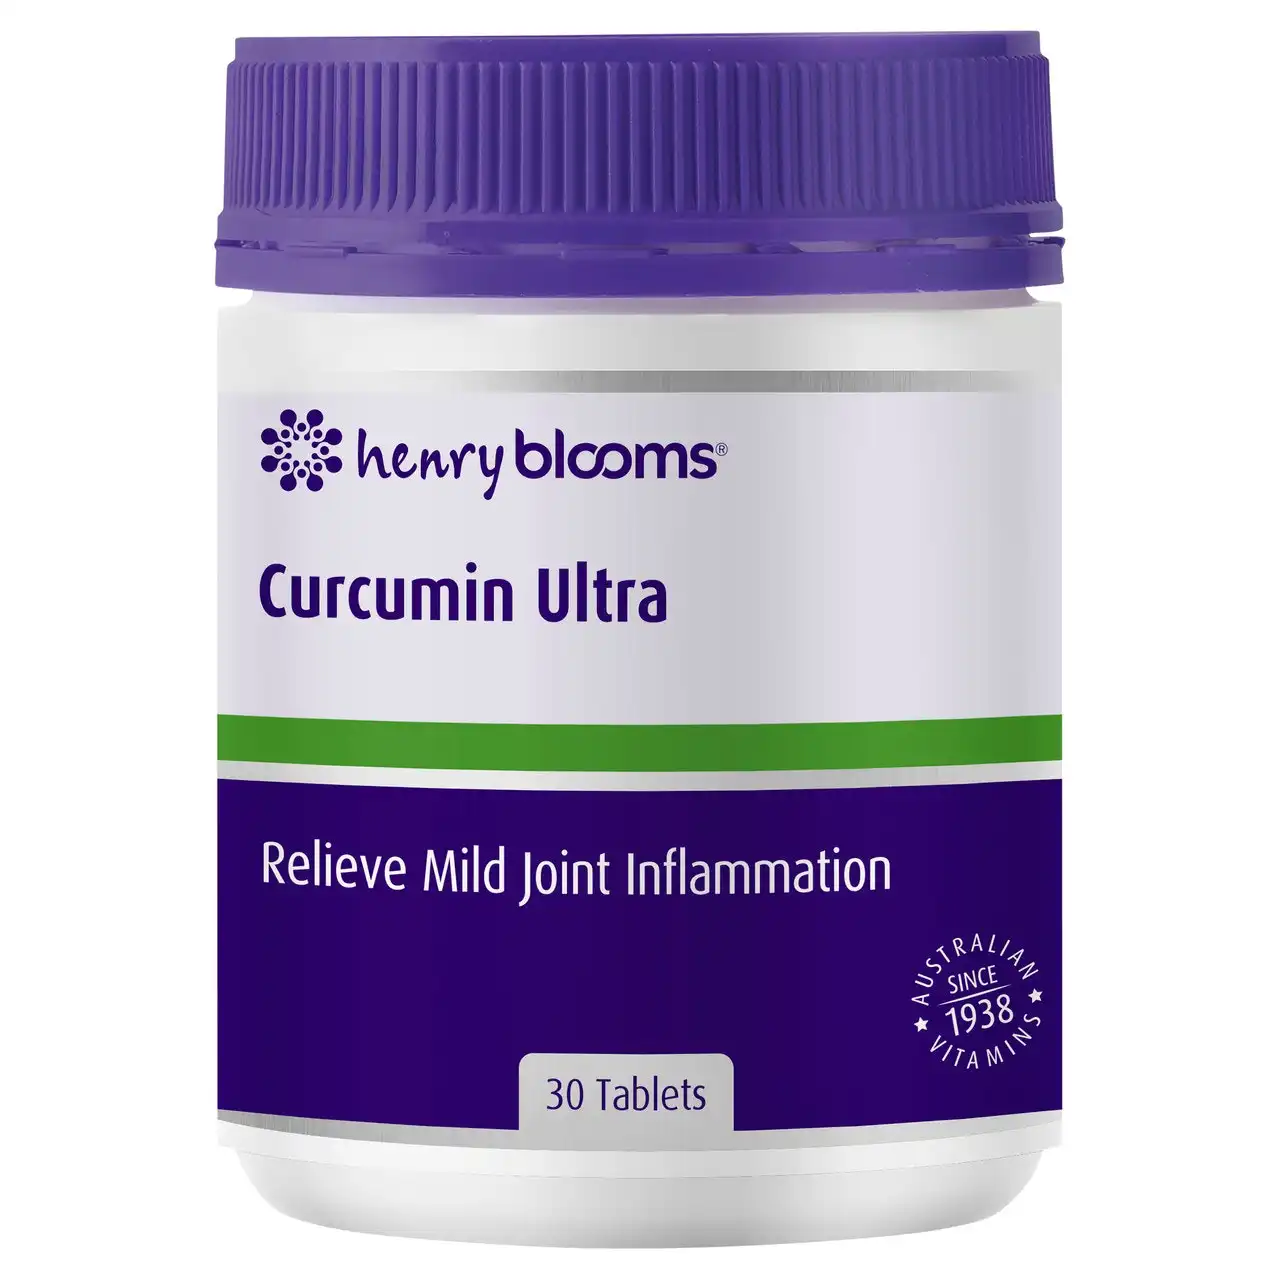 Henry Blooms Curcumin Ultra 30 tablets